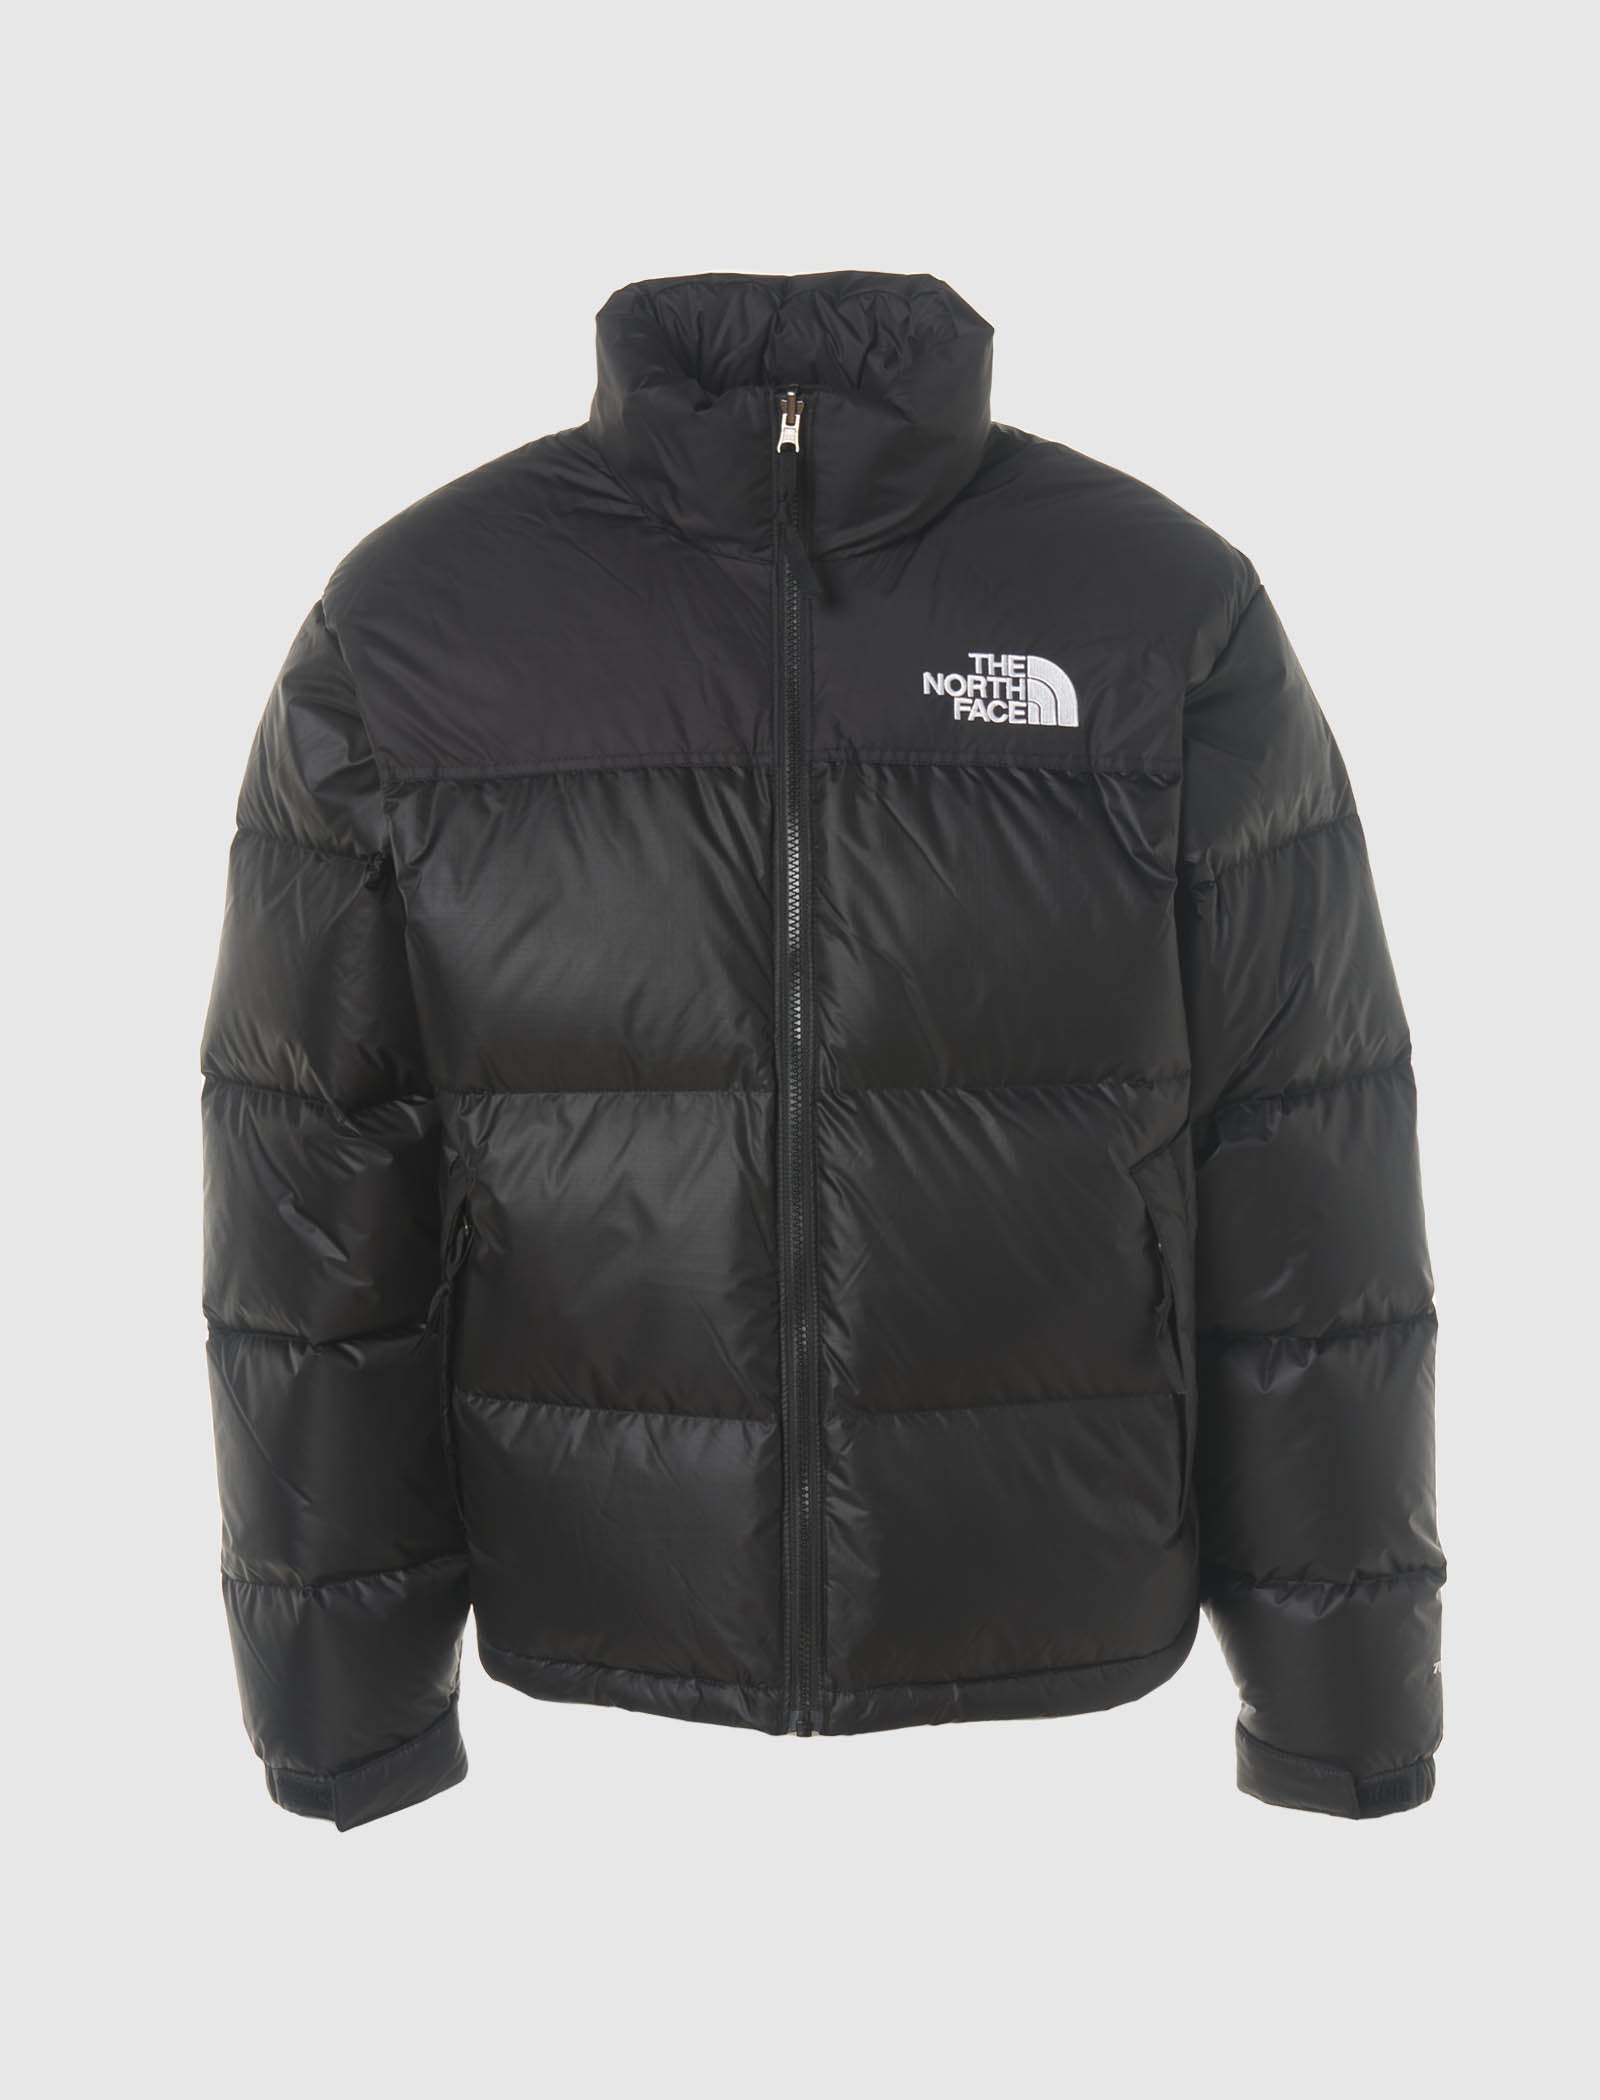 THE NORTH FACE 96 RETRO NUP JACKET